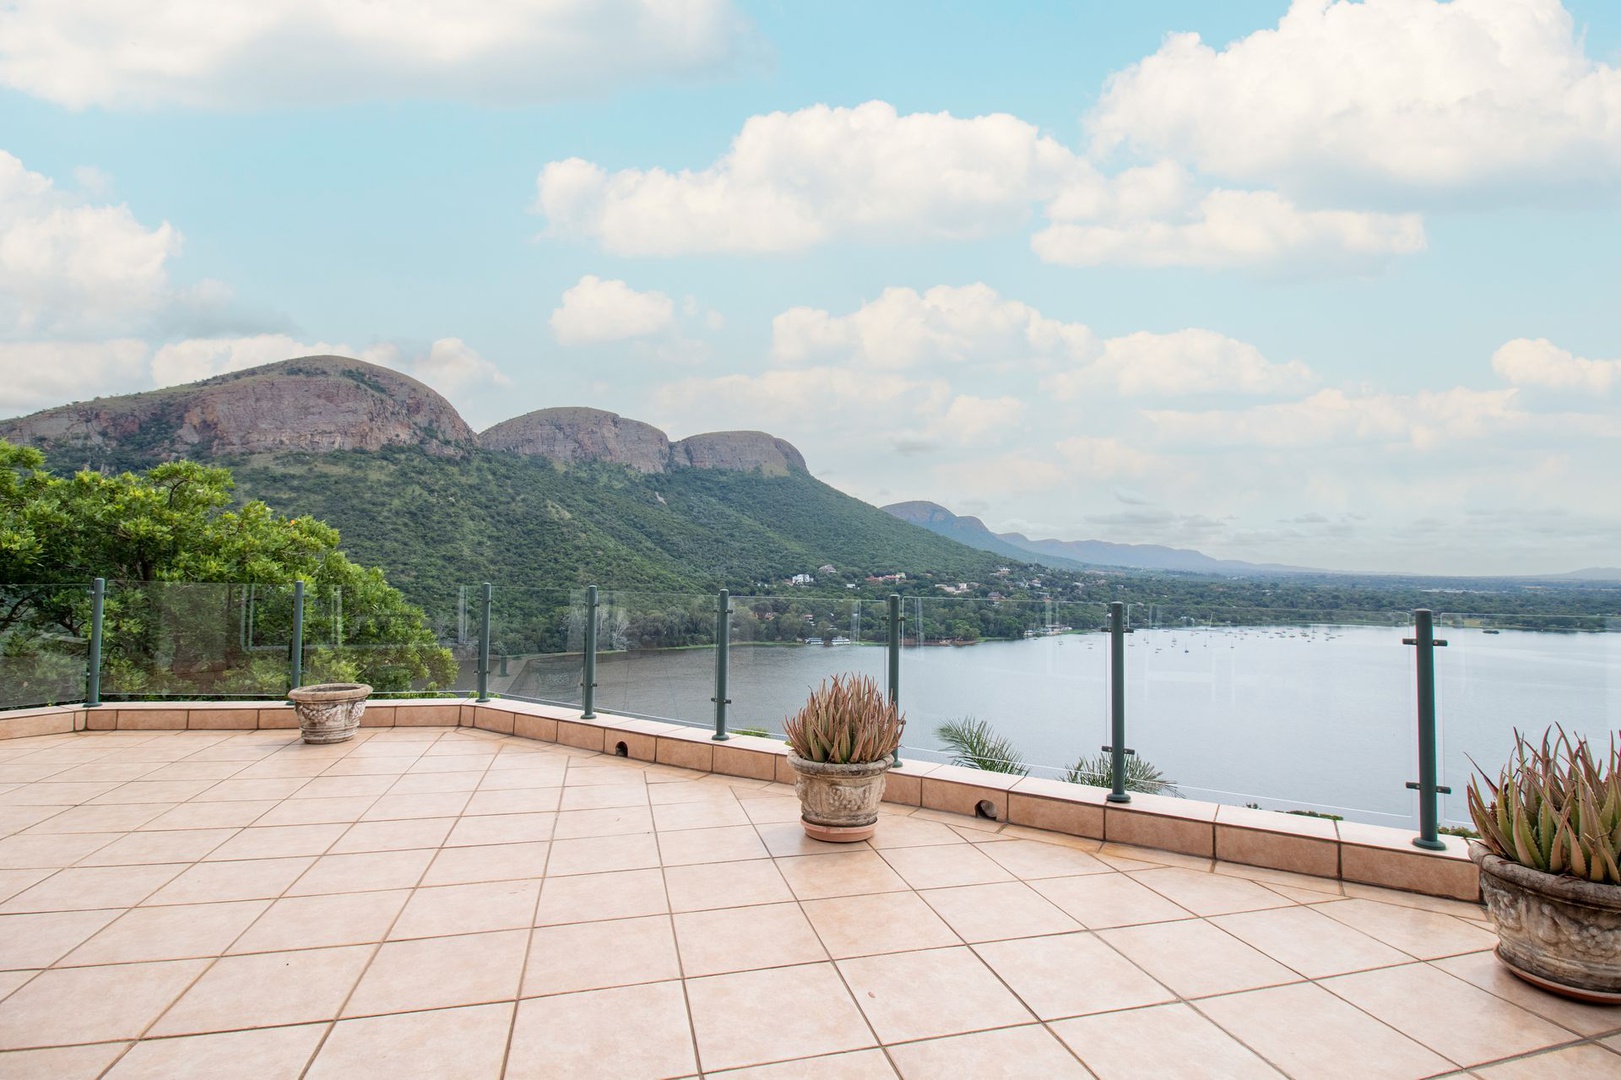 House in Kosmos - Patios have glass balustrades accentuating the clear views of the Magaliesberg mountains